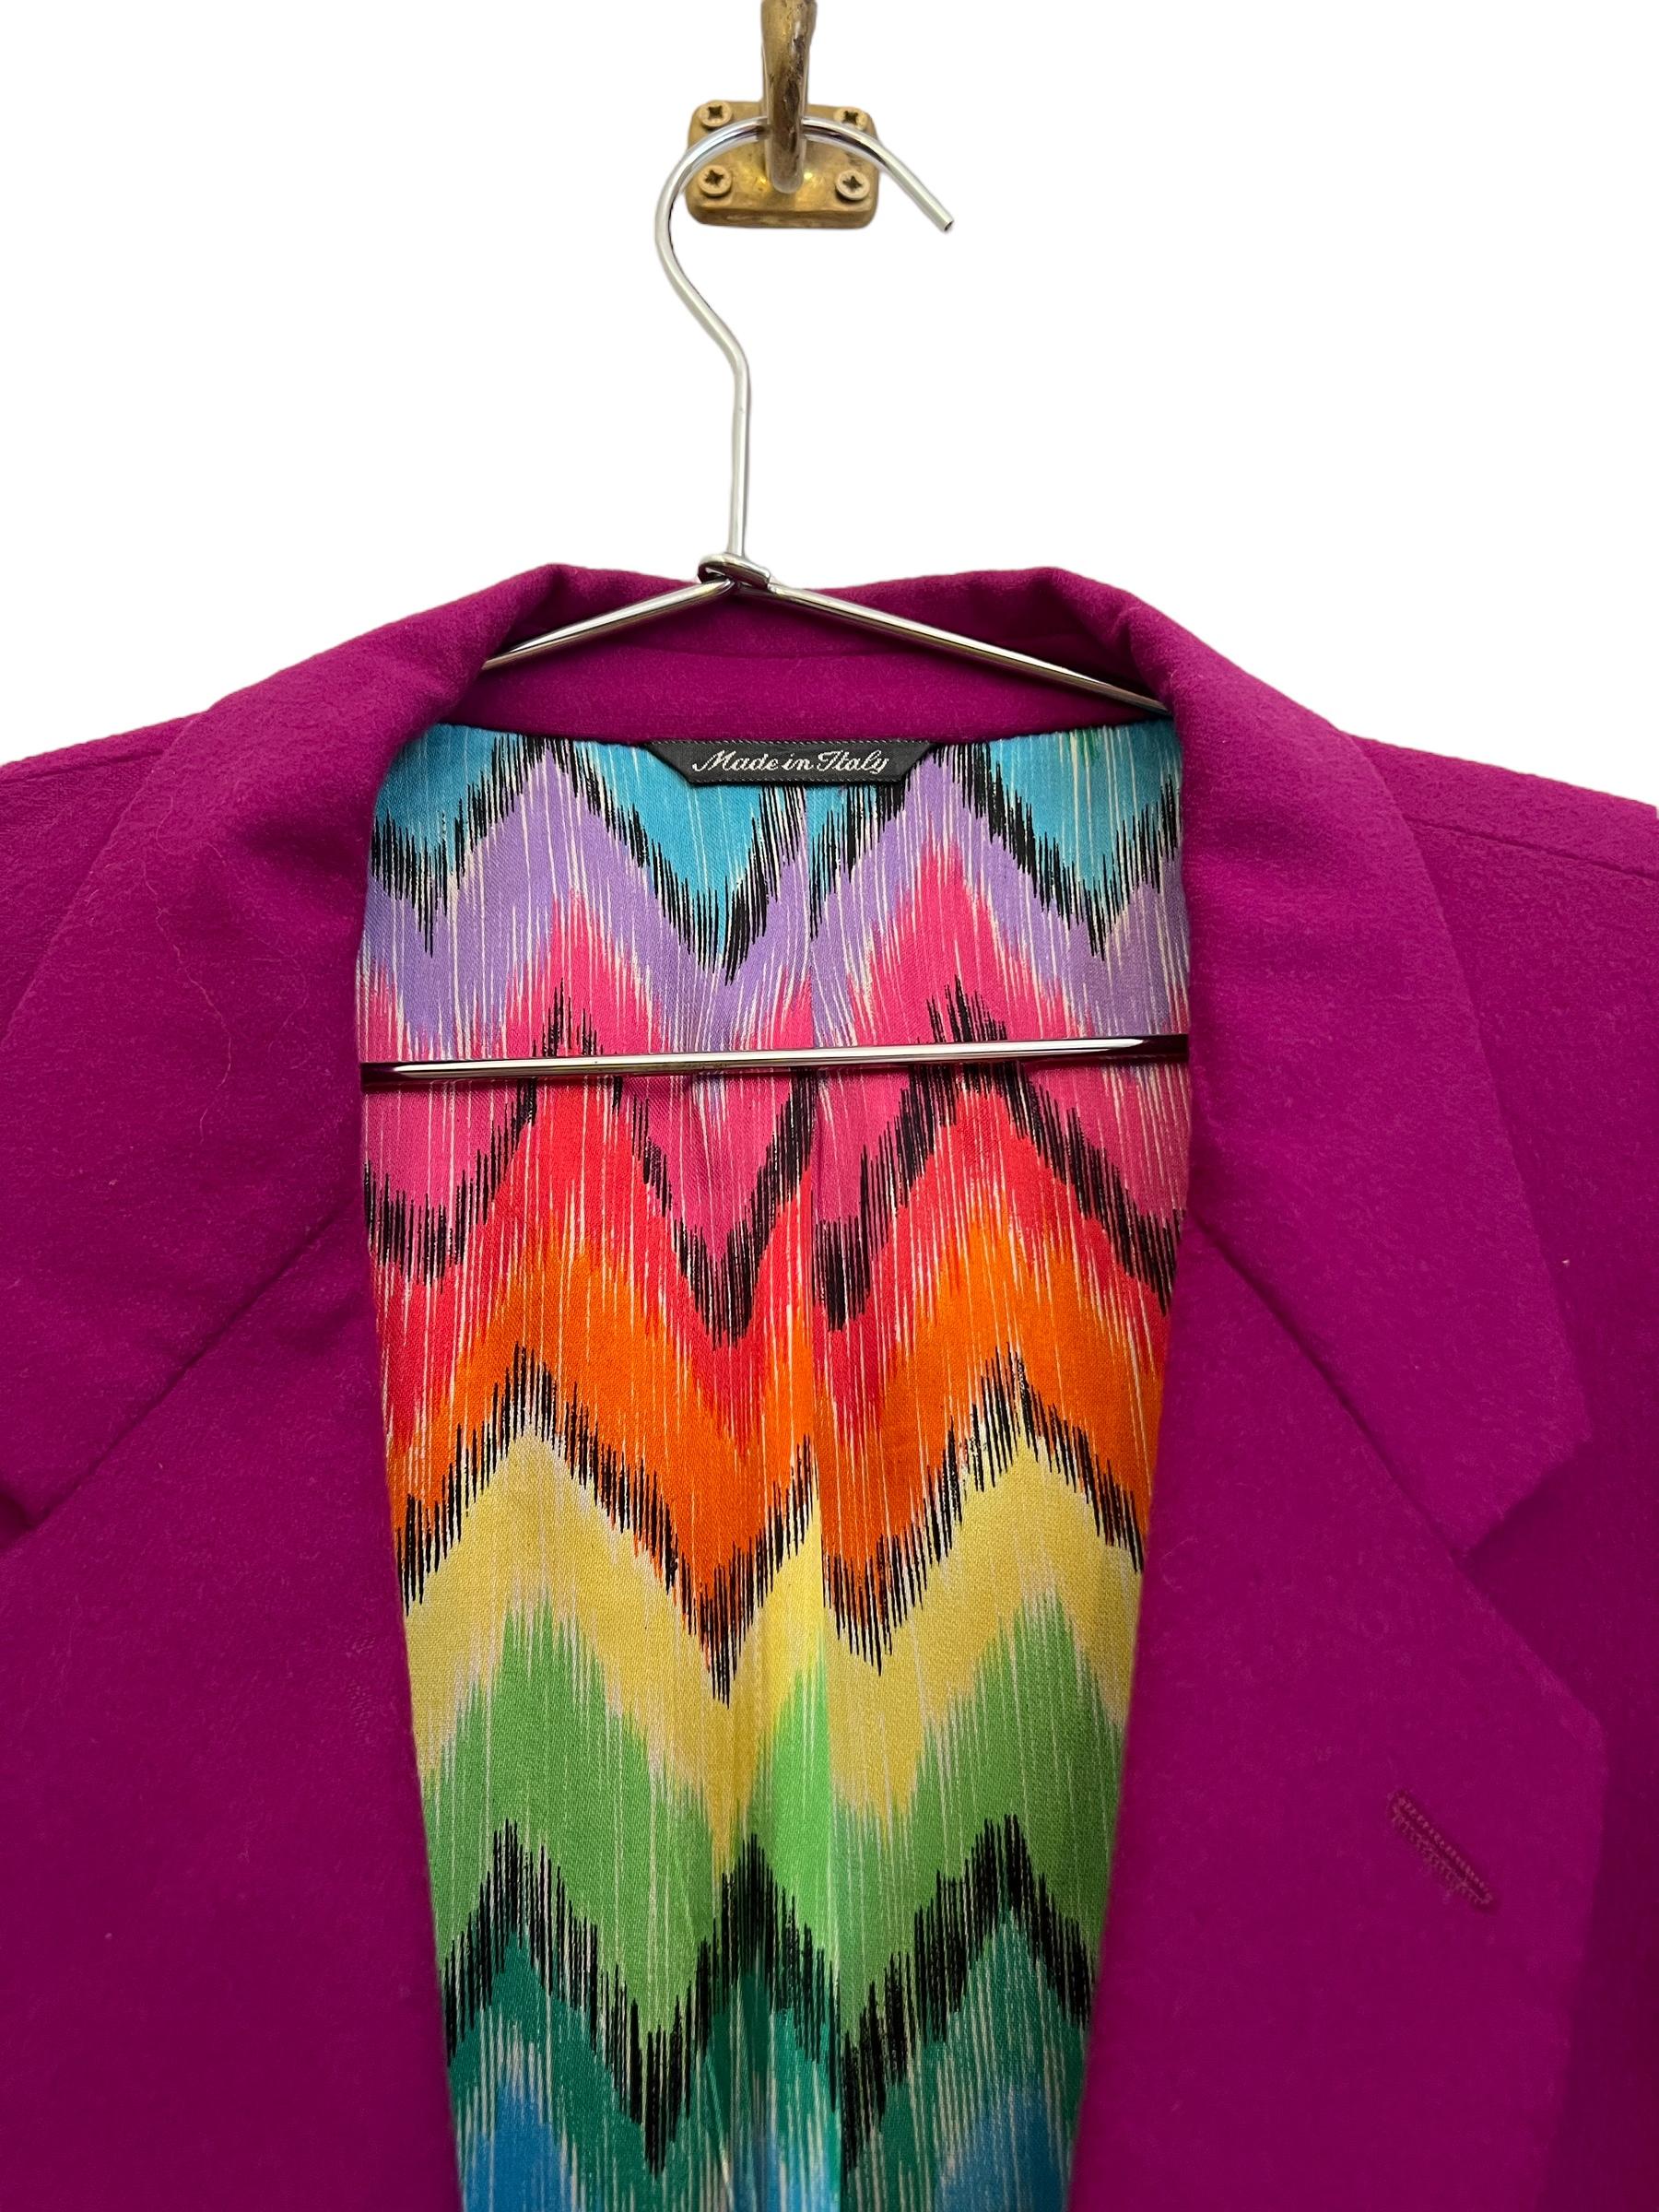 Versus by Gianni Versace Magenta Pink Rainbow Lined Cashmere Blazer Suit Jacket In Fair Condition For Sale In Sheffield, GB